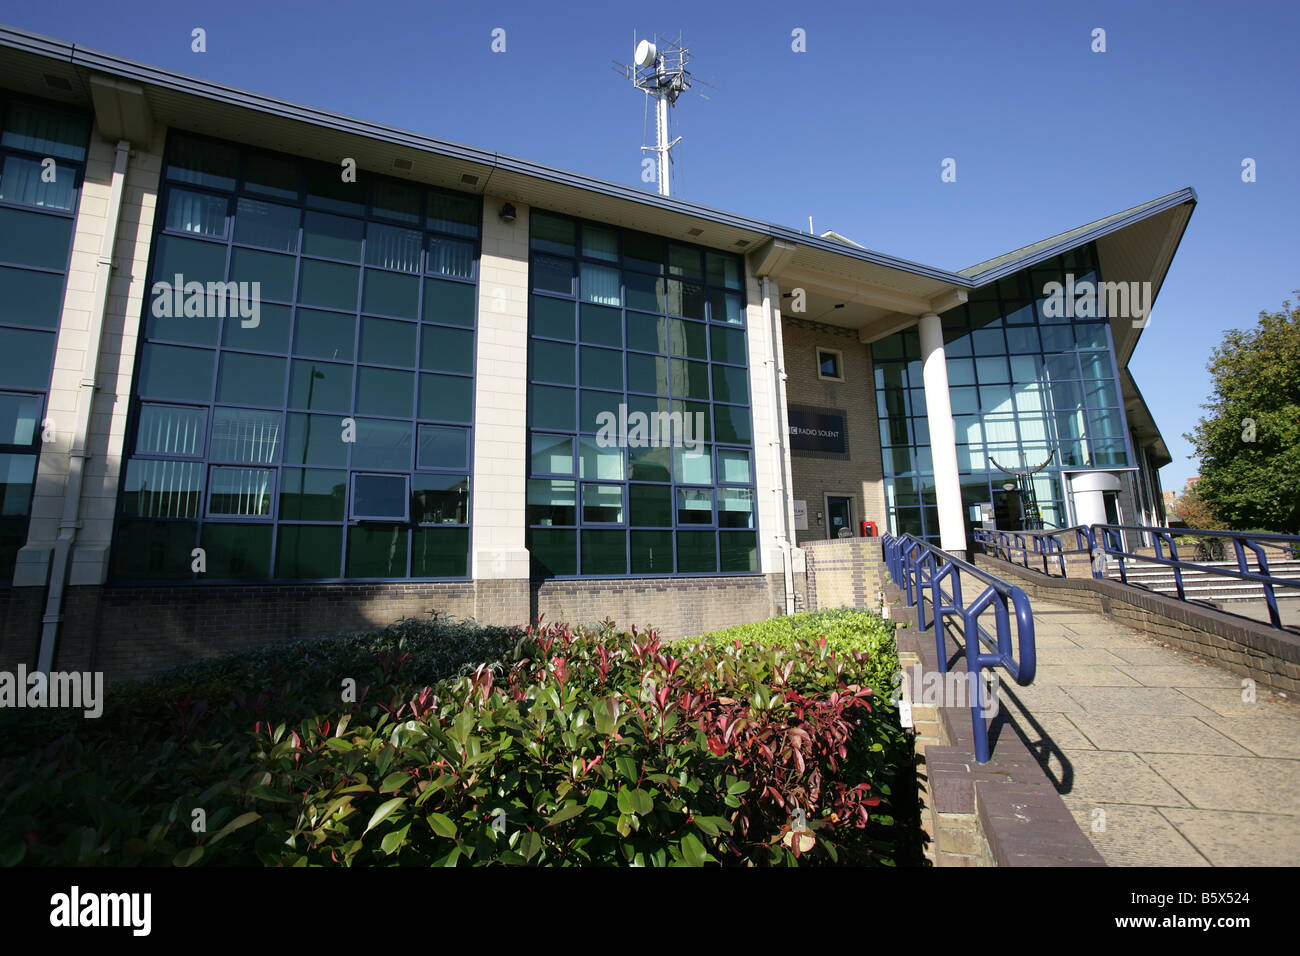 City of Southampton, England. External view of the BBC’s Southampton studio located at Havelock Road. Stock Photo